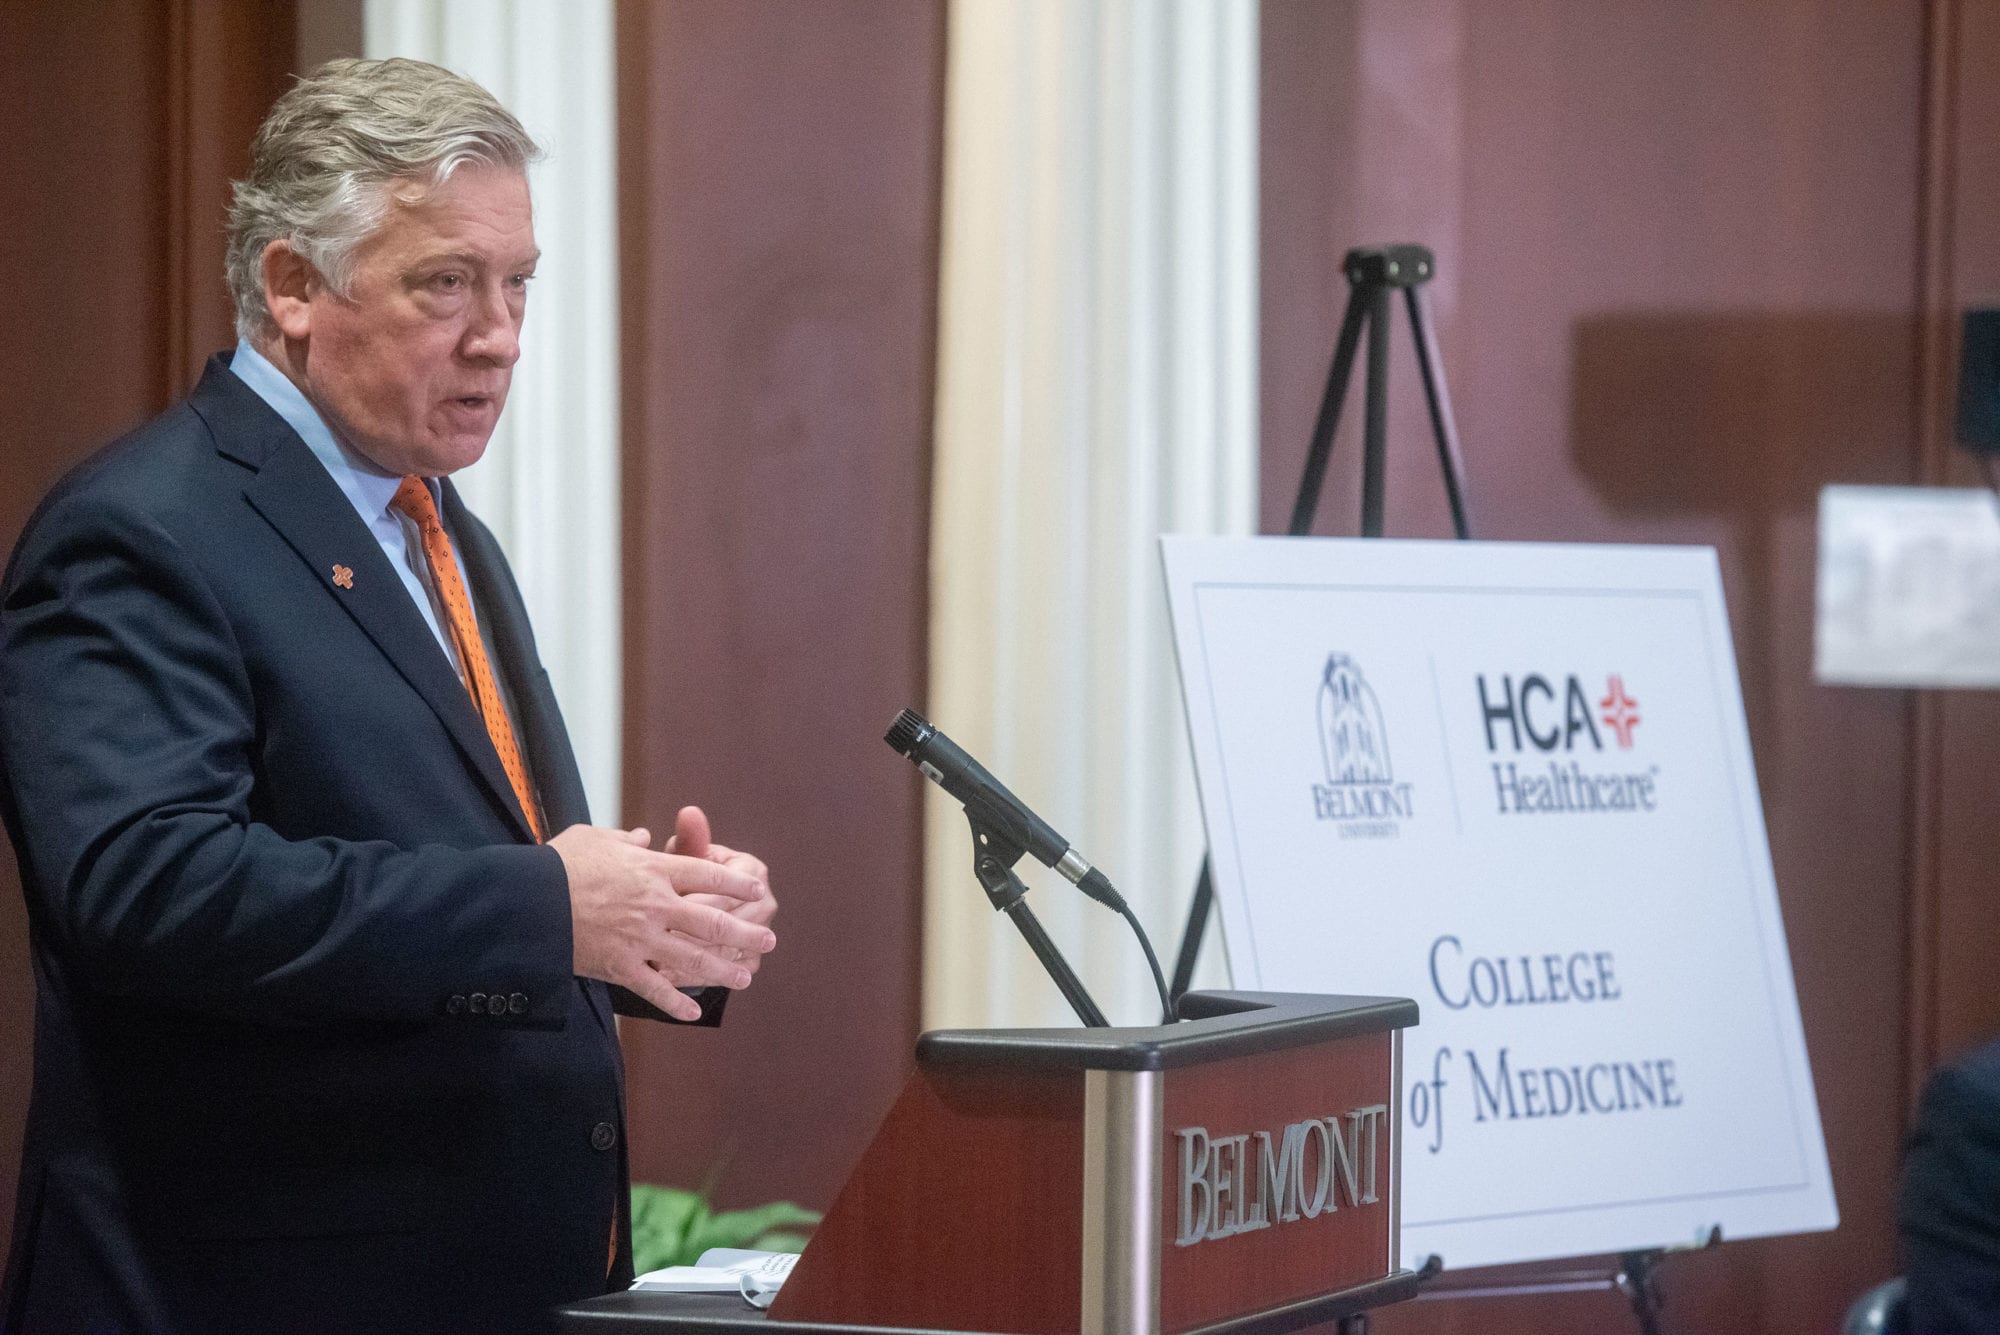 President of the Physician Services Group for Nashville, Tennessee-based, HCA Healthcare, Dr. Michael Cuffe speaks during Belmont's College of Medicine press conference announcement.